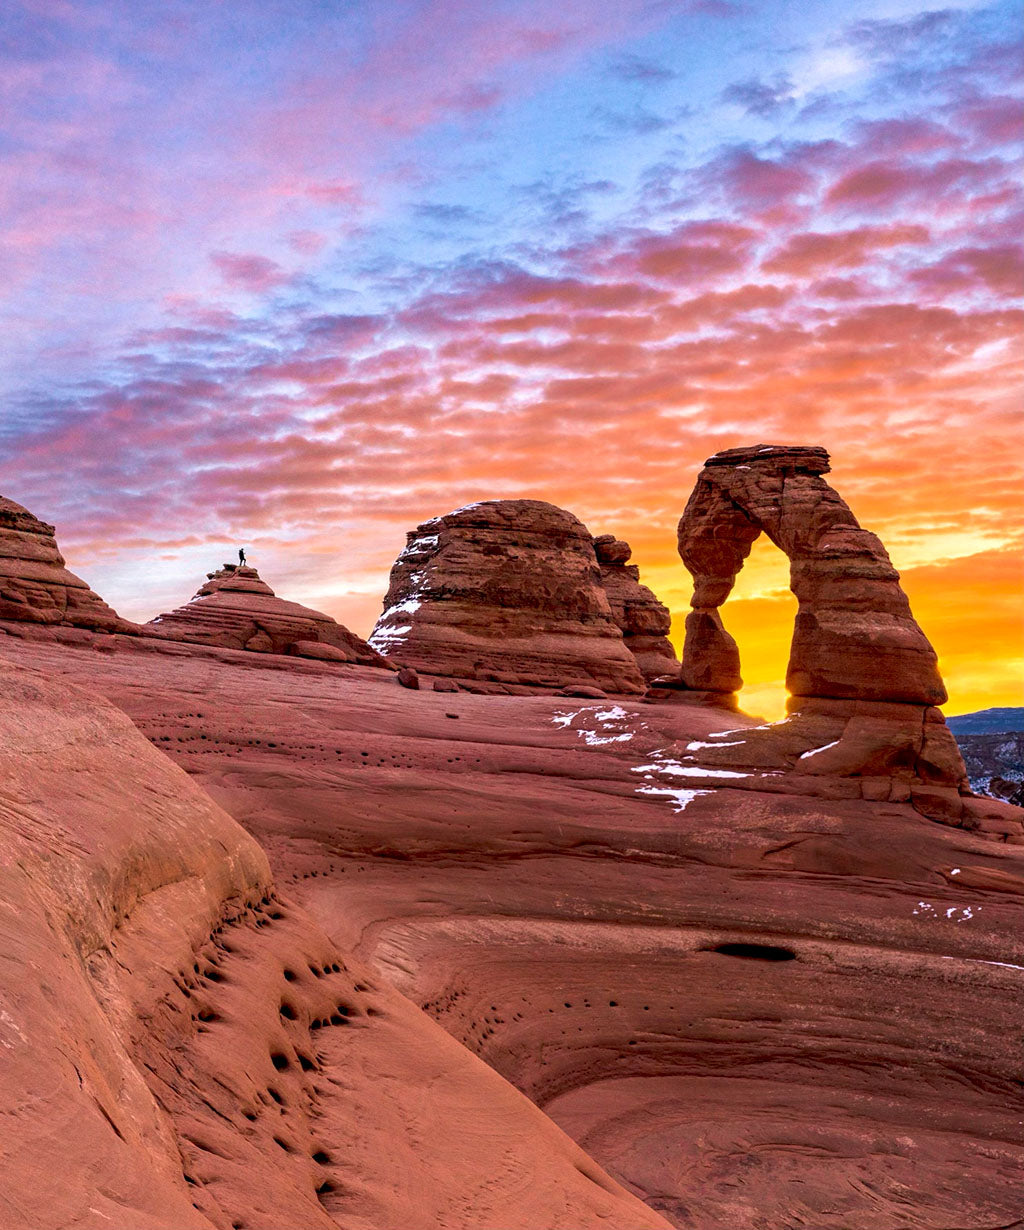 Delicate Arch in Arches National Park with a colorful sunset in the background